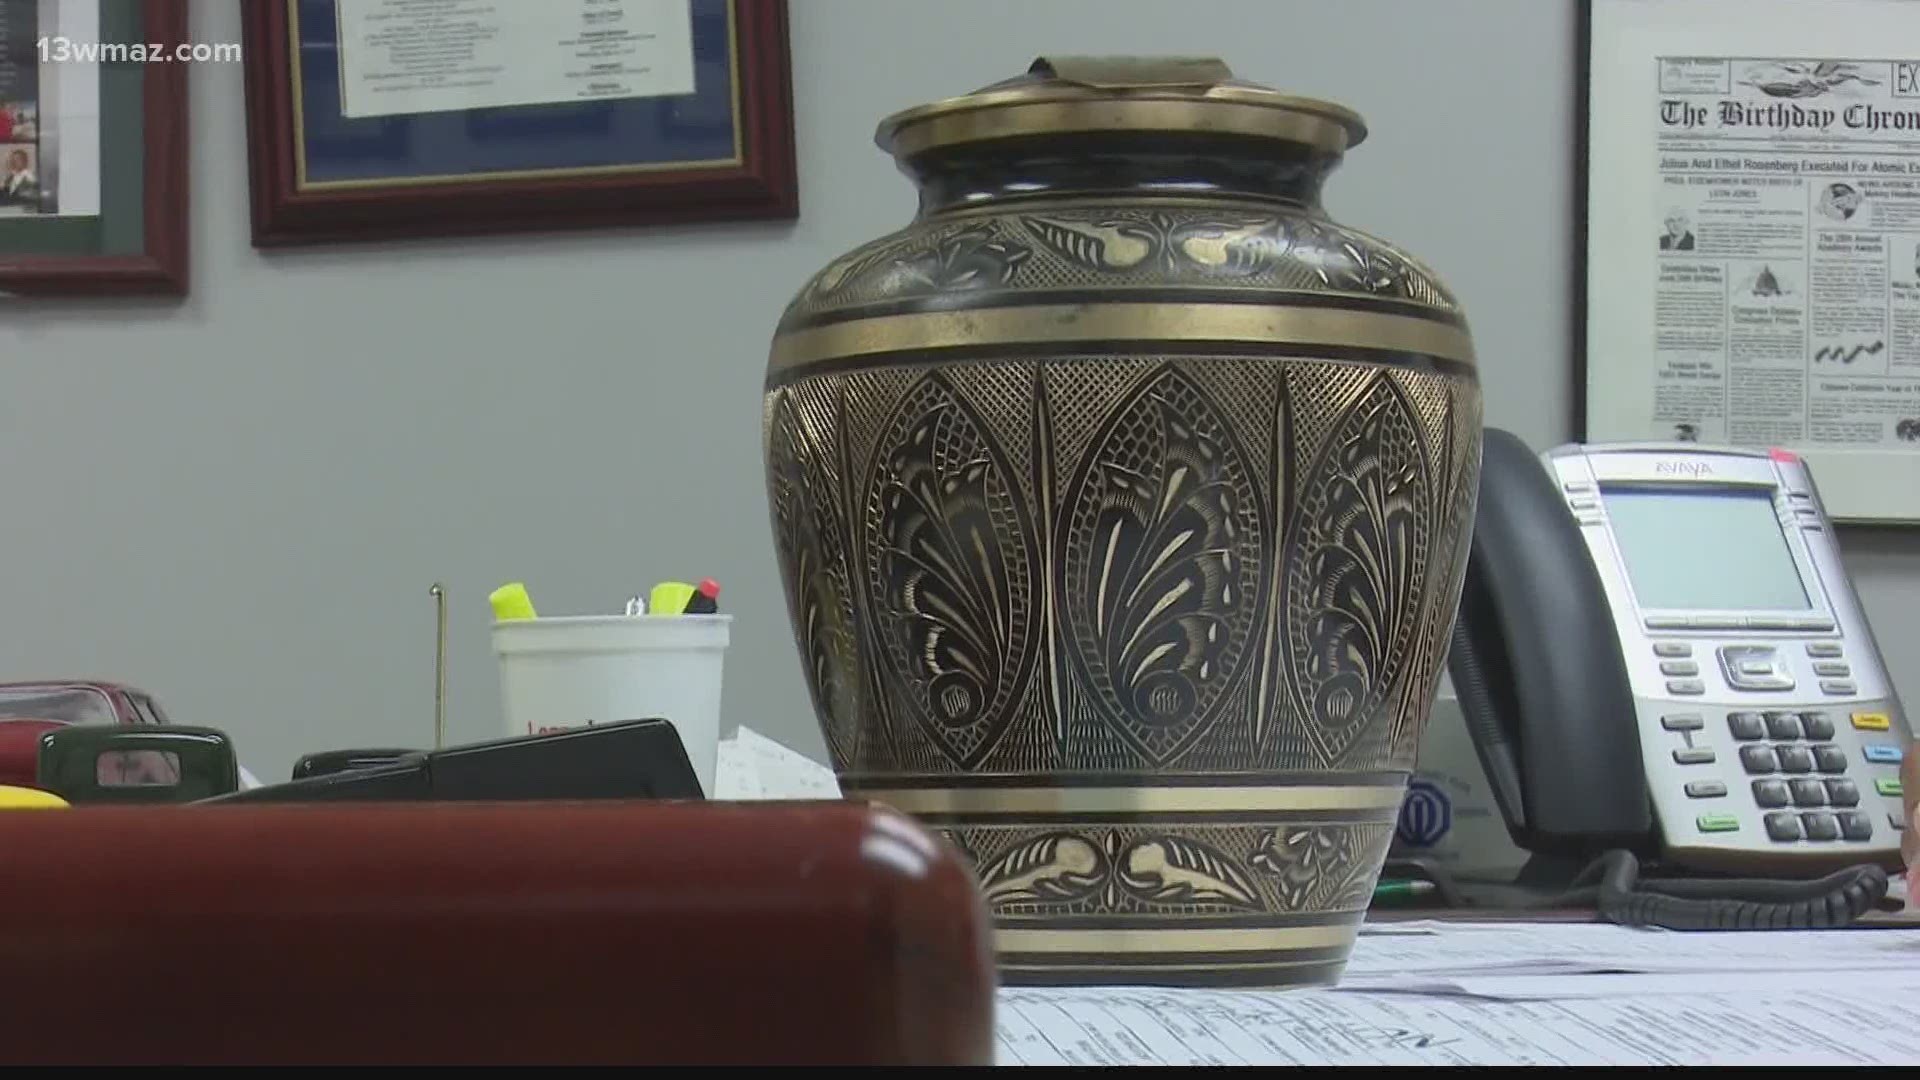 Bibb County Coroner Leon Jones says he has an expensive item someone may be looking for after he received a call from a business about an urn being found in a car.